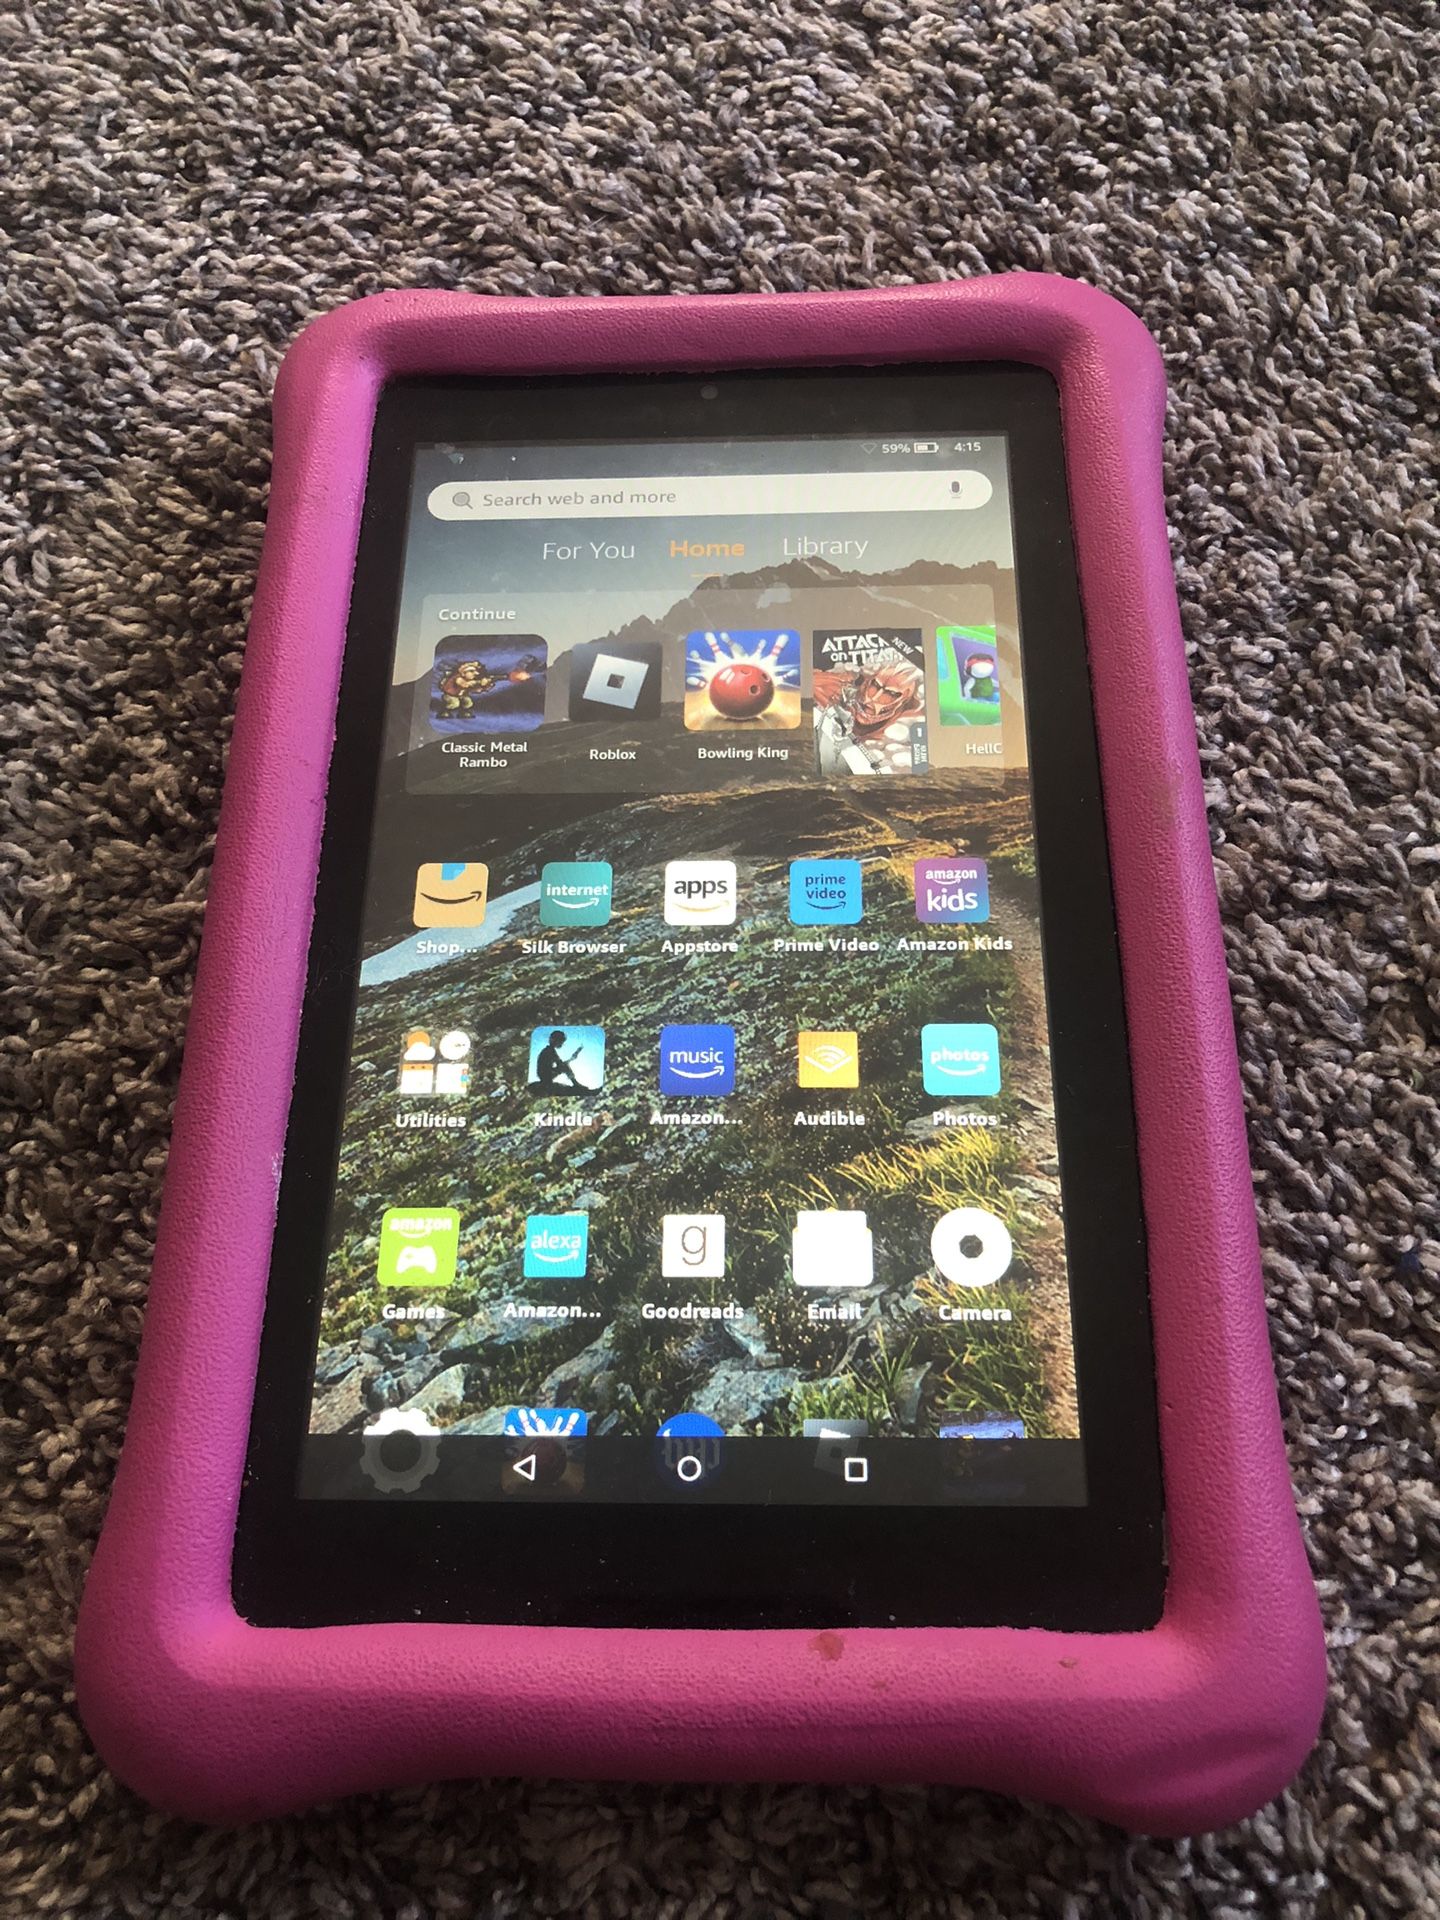 Fire 7 Kids Edition Tablet, 7" Display, 48 GB, Pink Kid-Proof Case